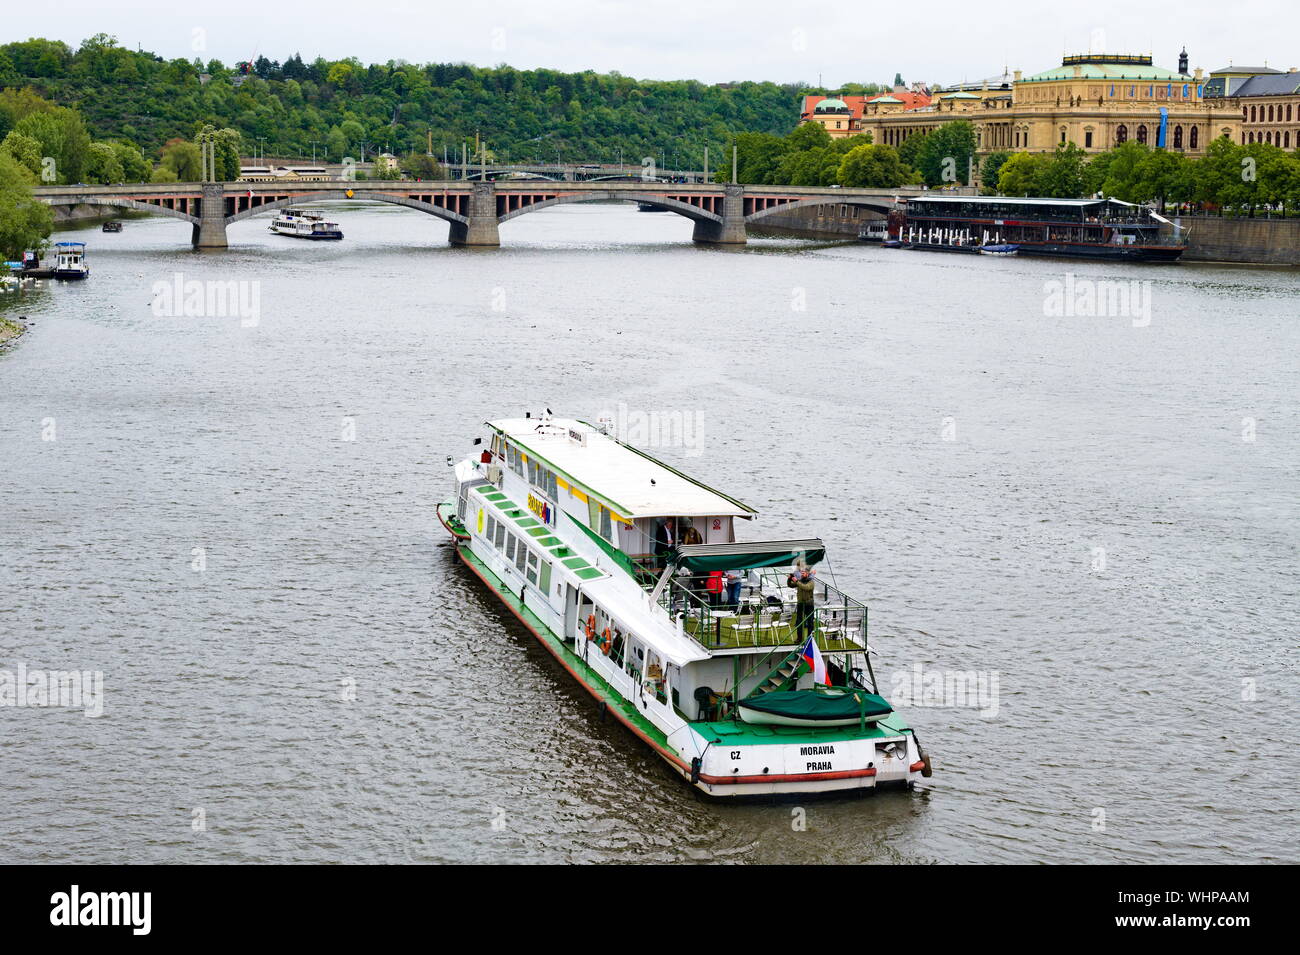 View of a tour boat on the Vltava River with the Mánes Bridge in the background, Prague, Czech Republic Stock Photo